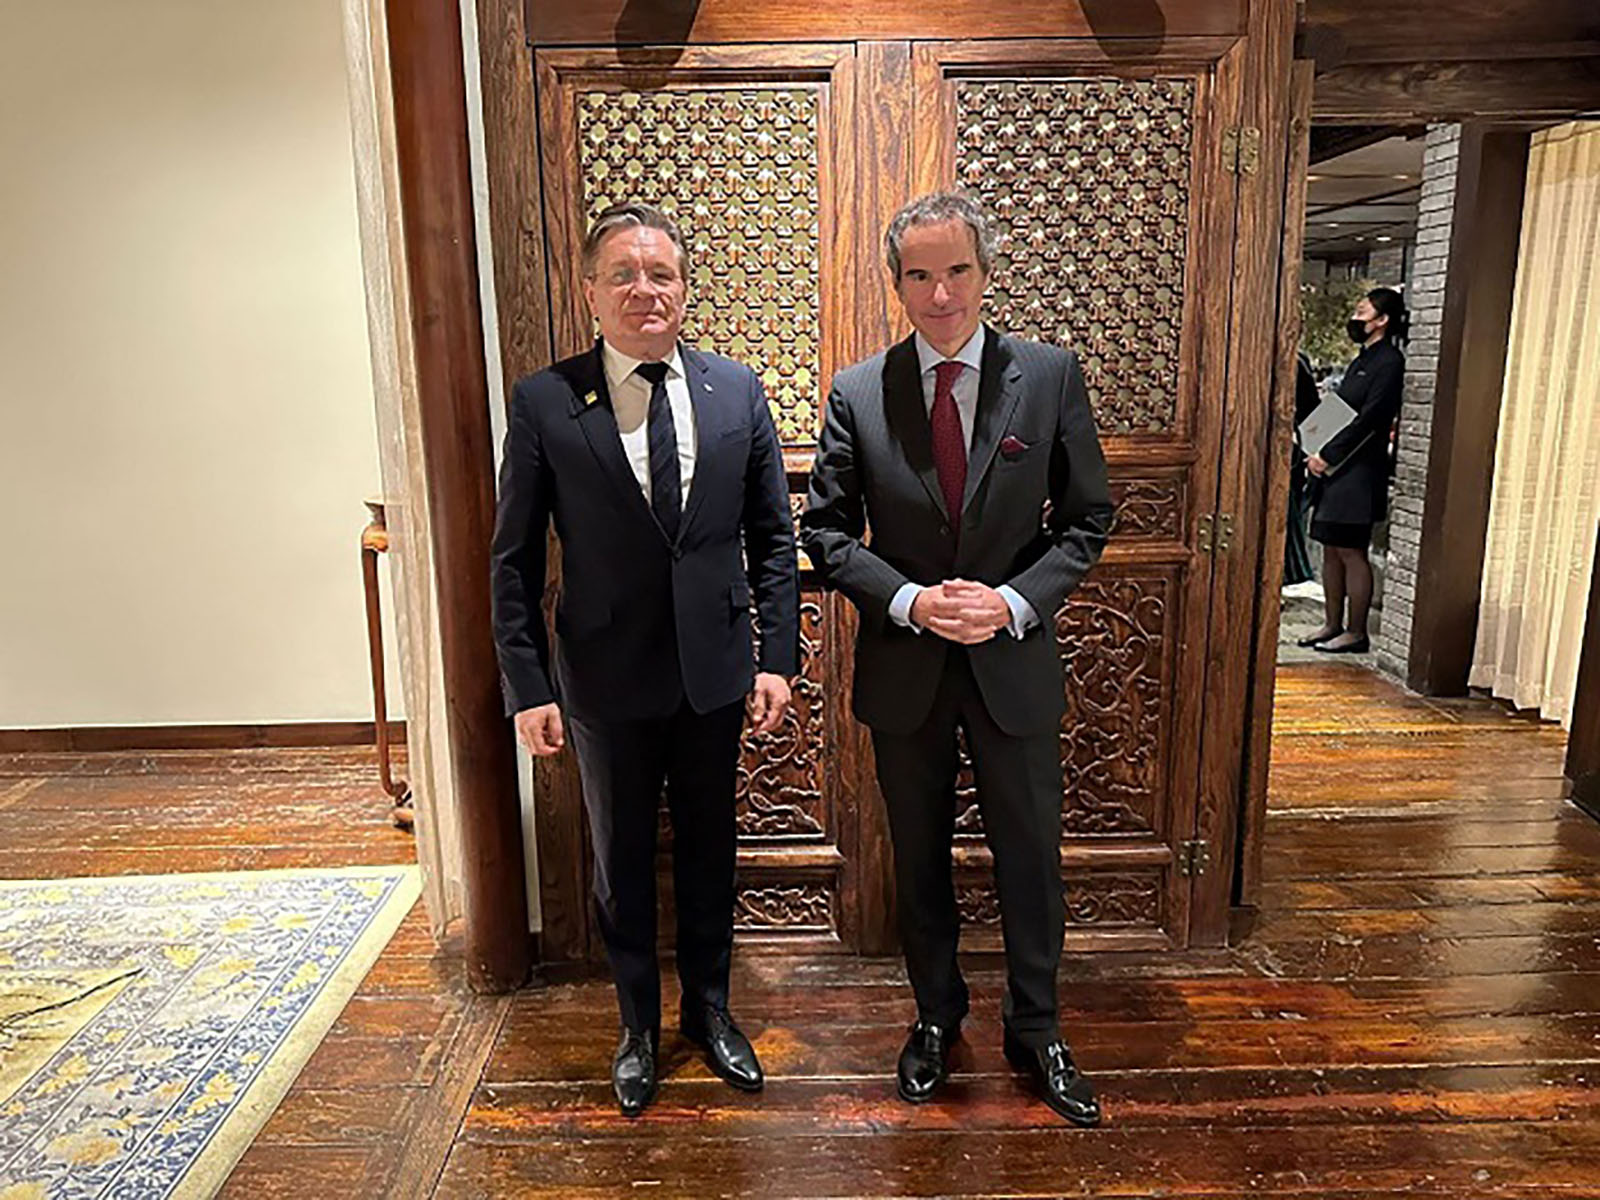 Rosatom Director General Alexei Likhachev is pictured with International Atomic Energy Agency (IAEA) Director General Rafael Mariano Grossi in Beijing, on May 24.